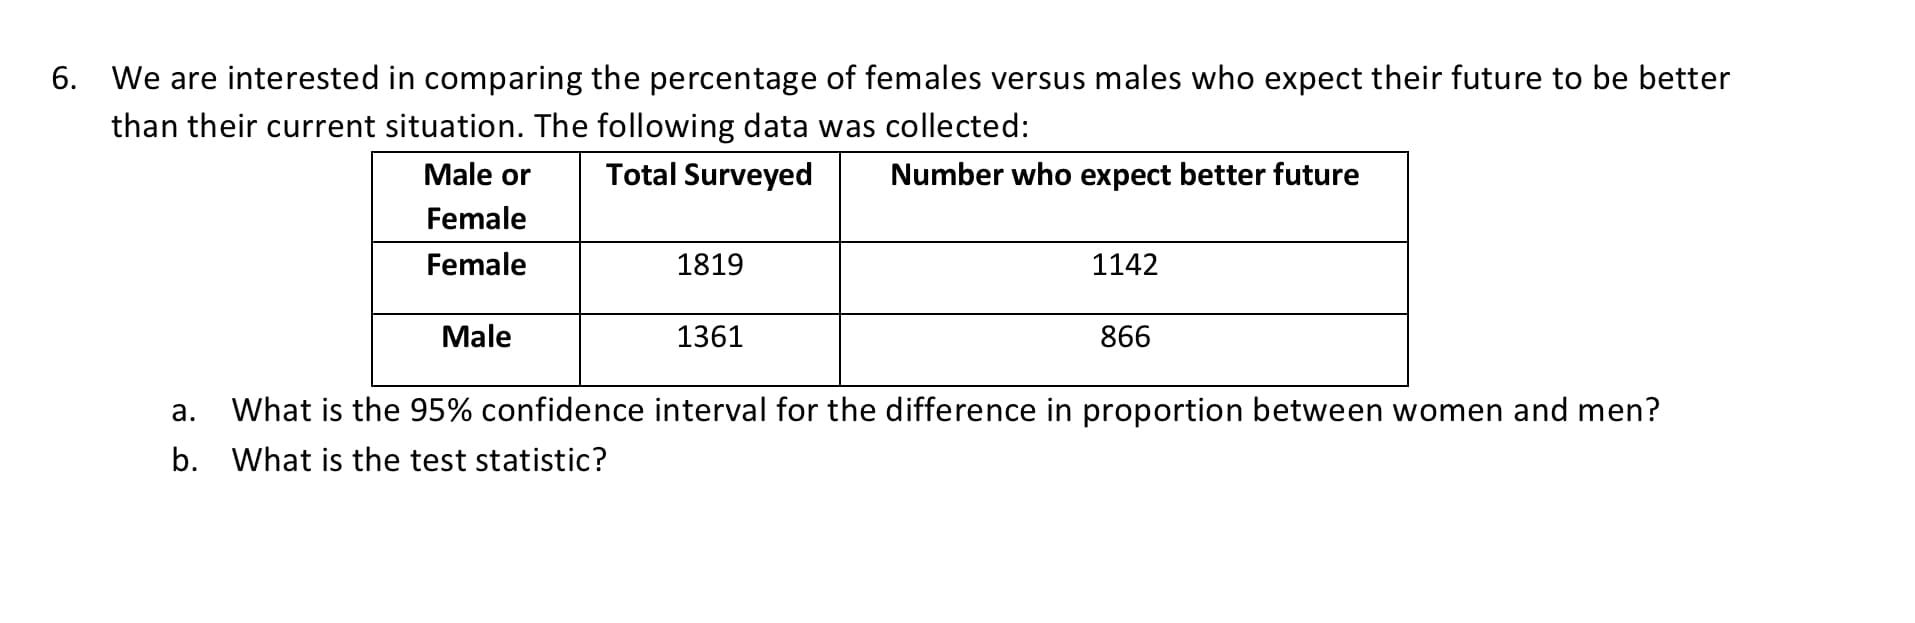 We are interested in comparing the percentage of females versus males who expect their future to be better
than their current situation. The following data was collected:
Male or
Total Surveyed
Number who expect better future
Female
Female
1819
1142
Male
1361
866
а.
What is the 95% confidence interval for the difference in proportion between women and men?
b. What is the test statistic?
